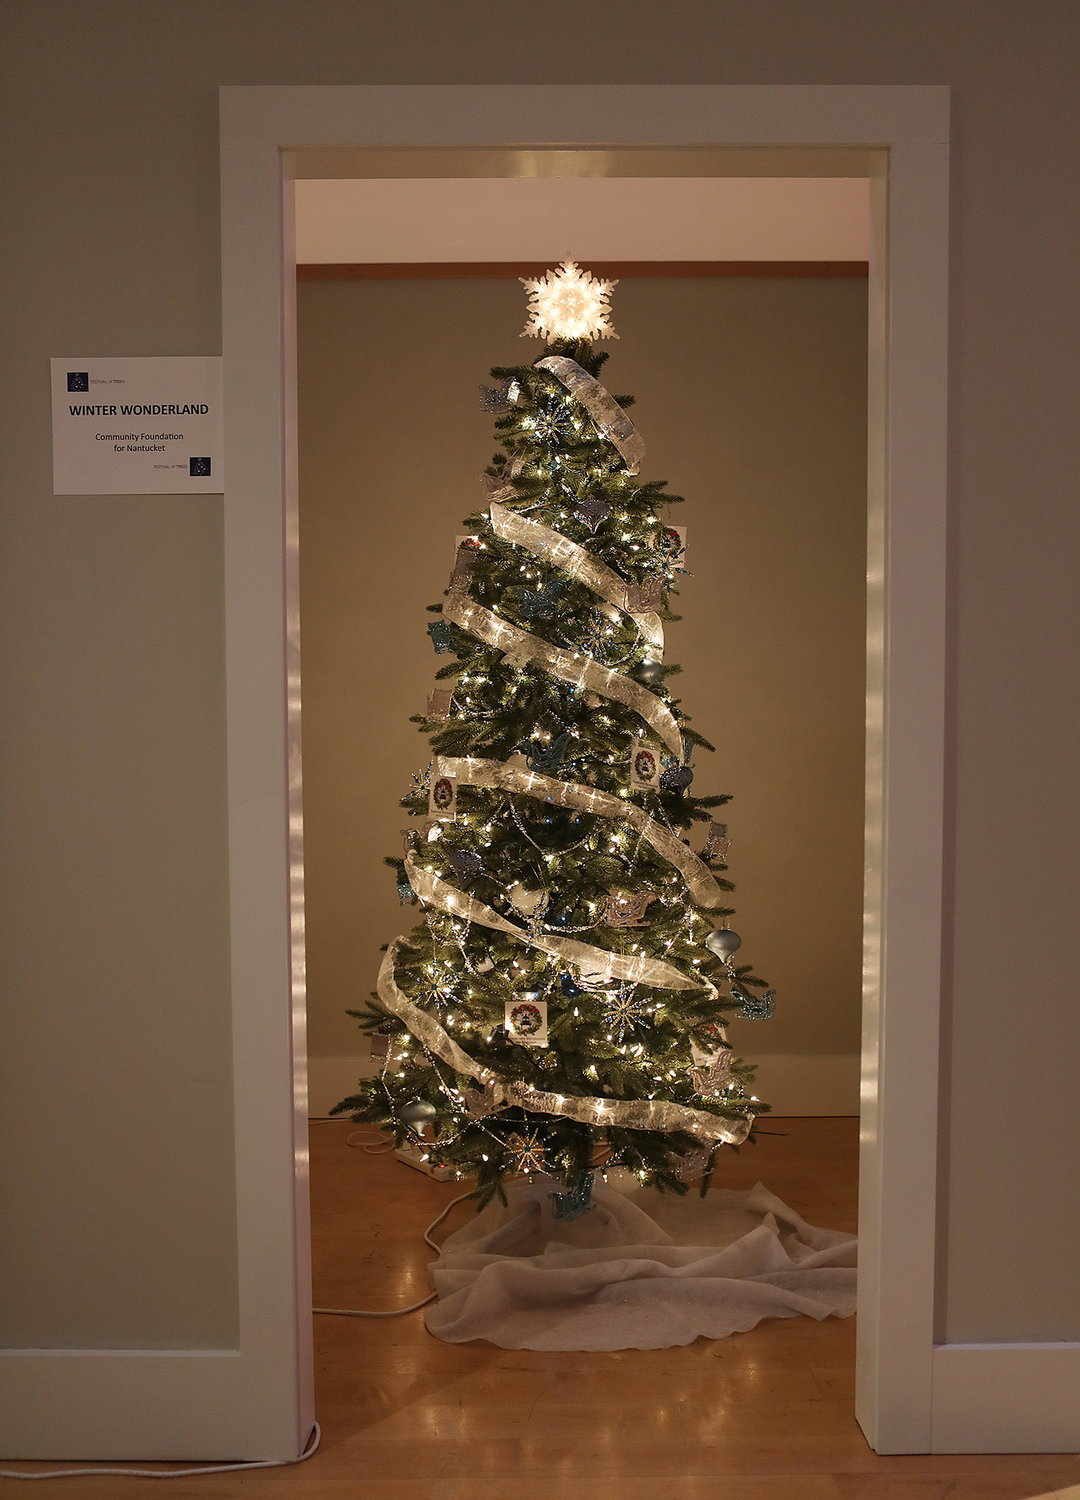 The Community Foundation of Nantucket's "Winter Wonderland" tree. Nantucket Historical Association Festival of Trees at the Whaling Museum.